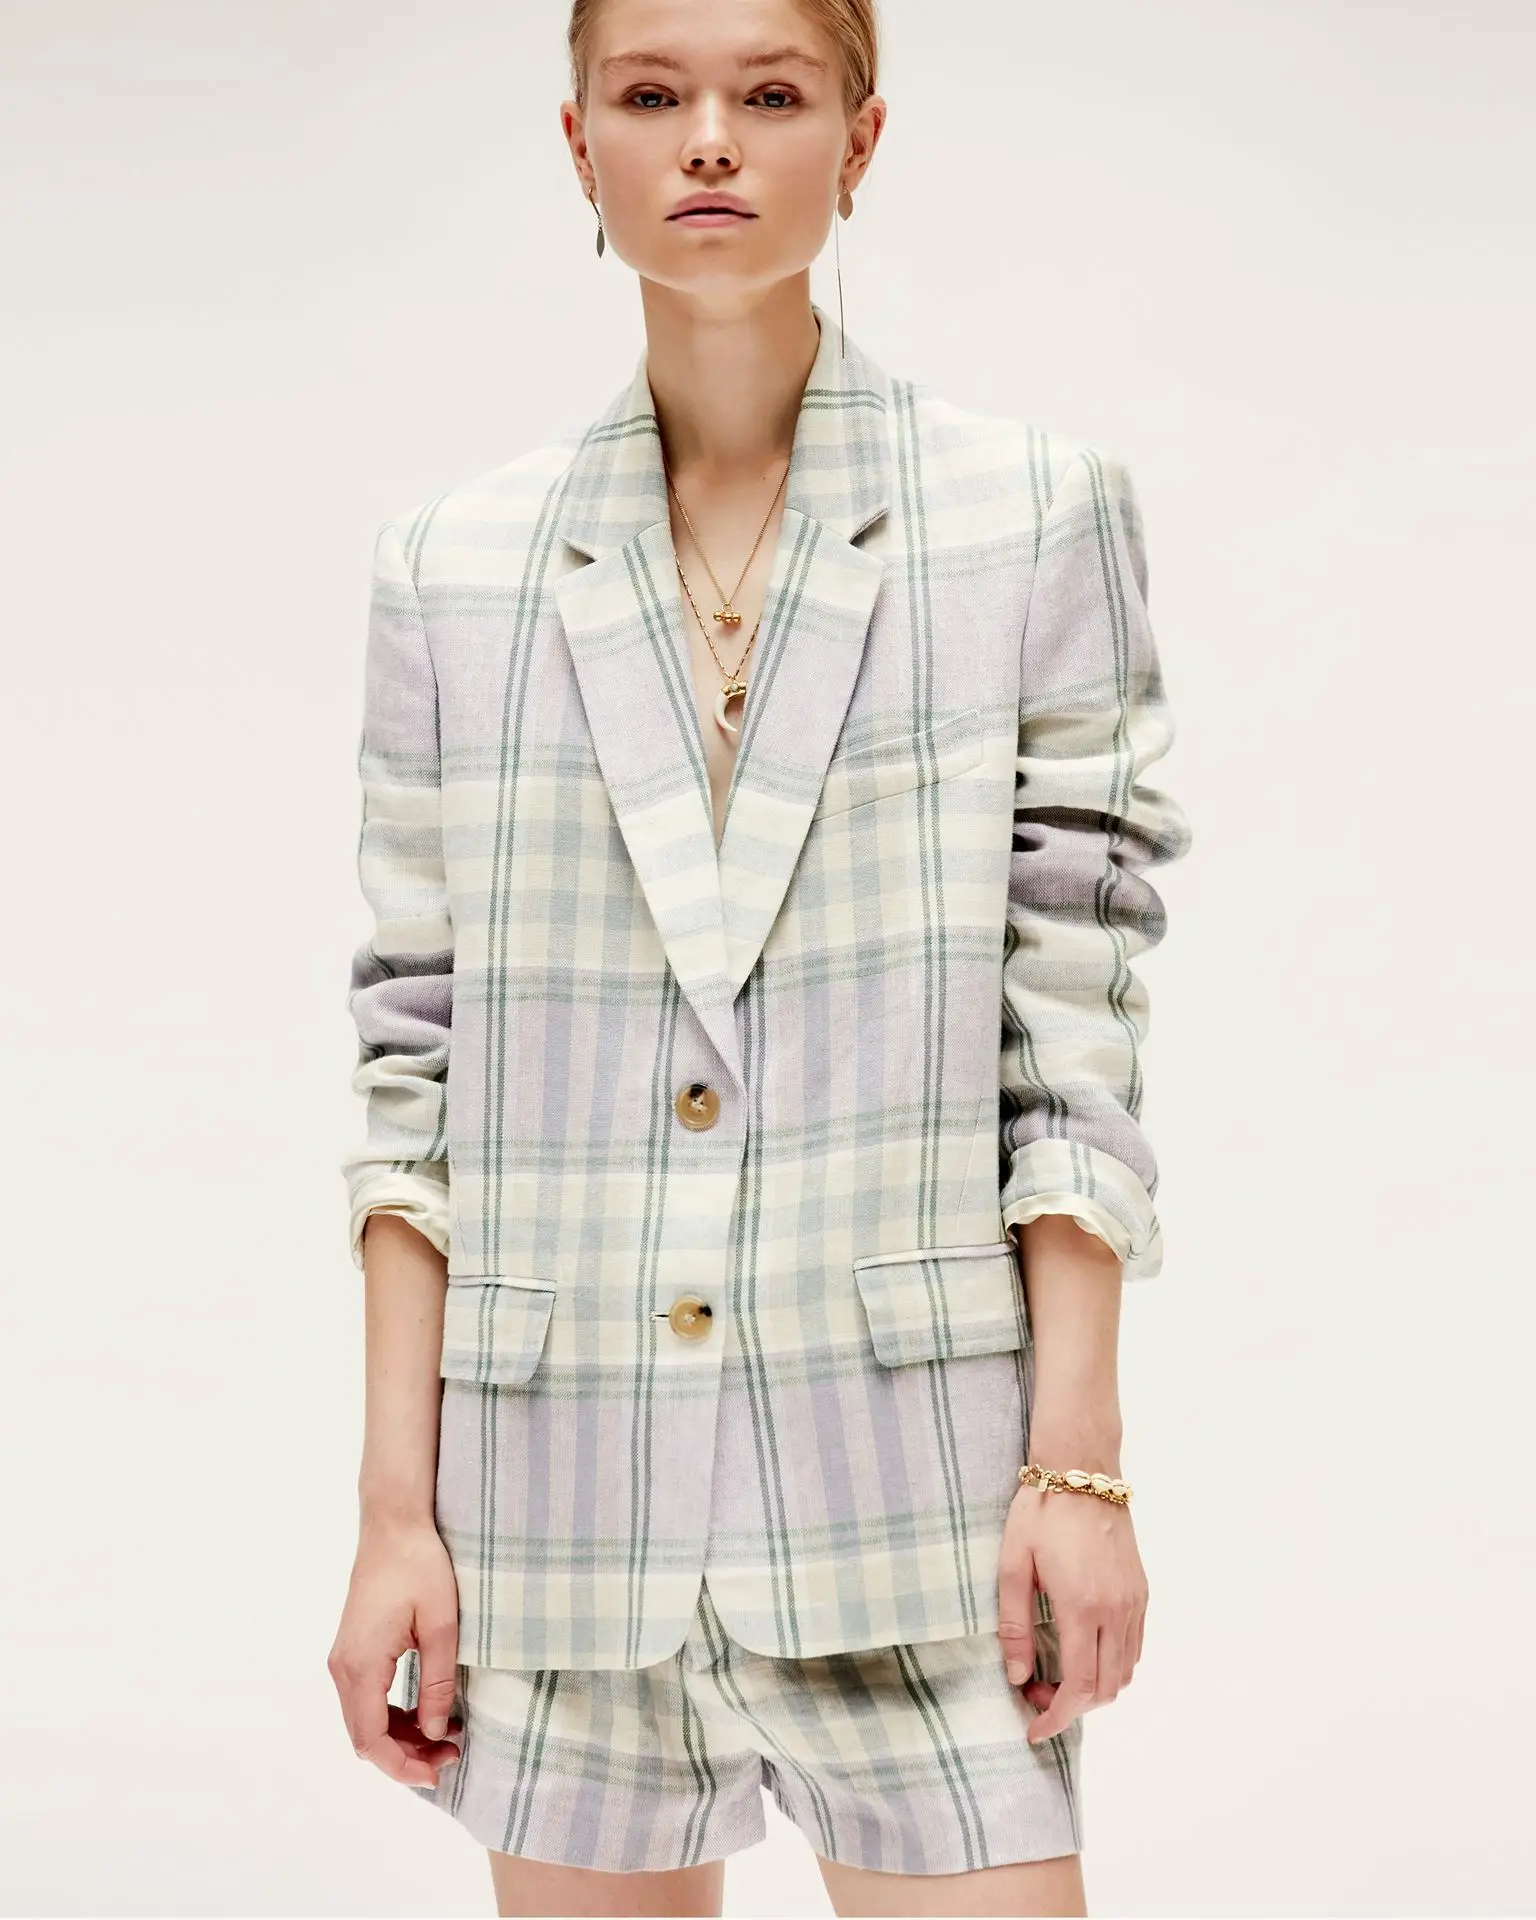 Women Coat 2021 Early Autumn Linen Plaid Long-sleeved Suit Jacket Women Loose Casual All-match Small Suit